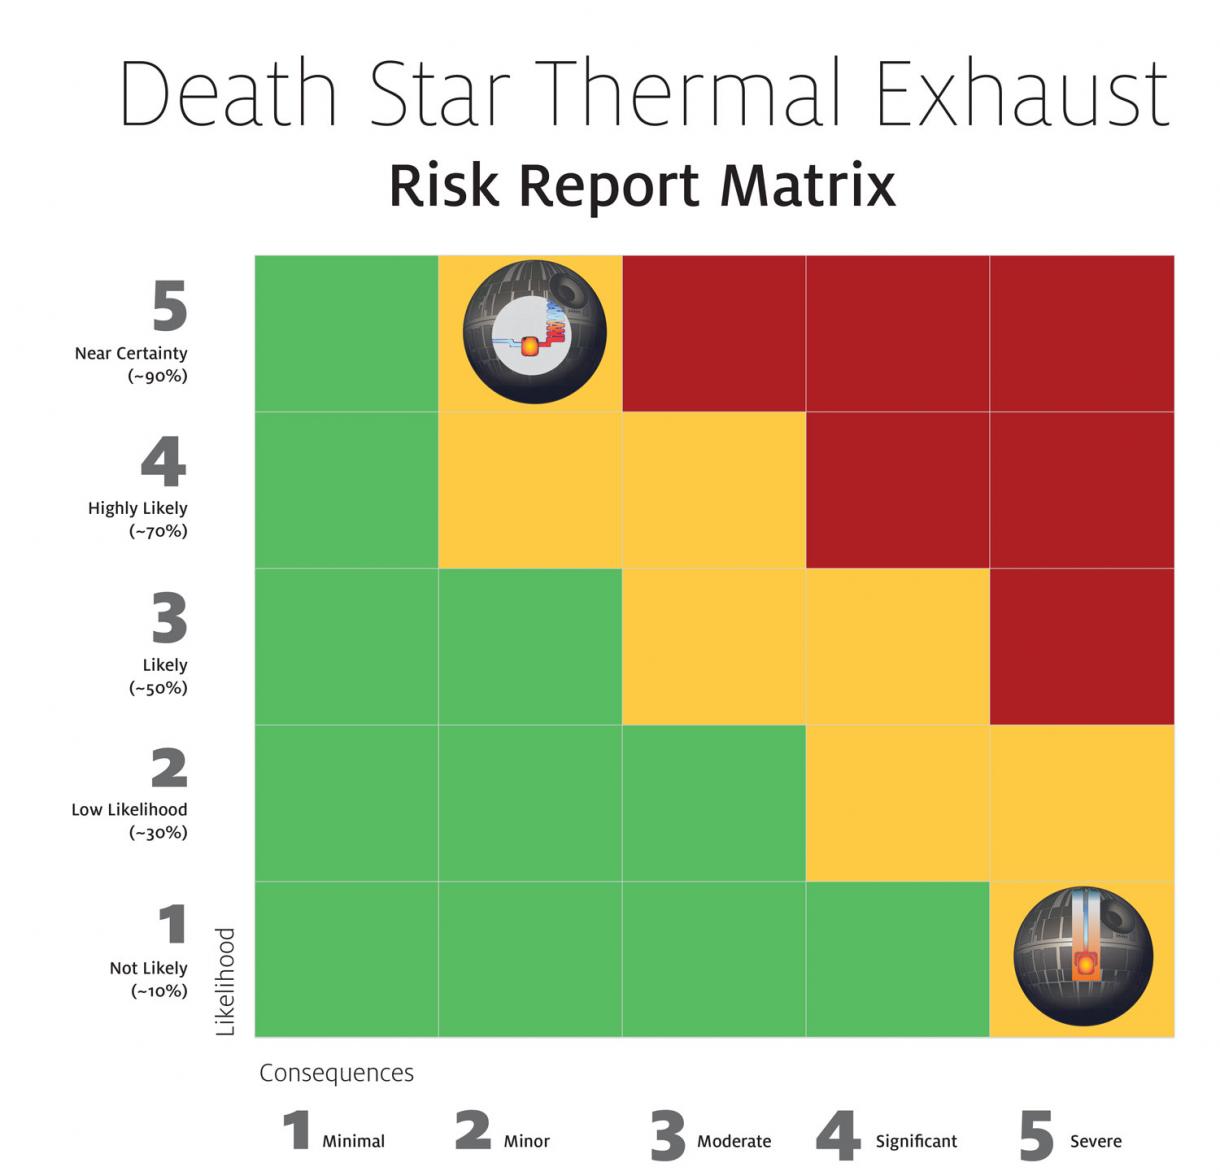 Risk report matrix of the Death Star thermal exhaust port design. A 5x5 grid shows the likelihood of an attack and the potential severity of consequences if an attack occurs.